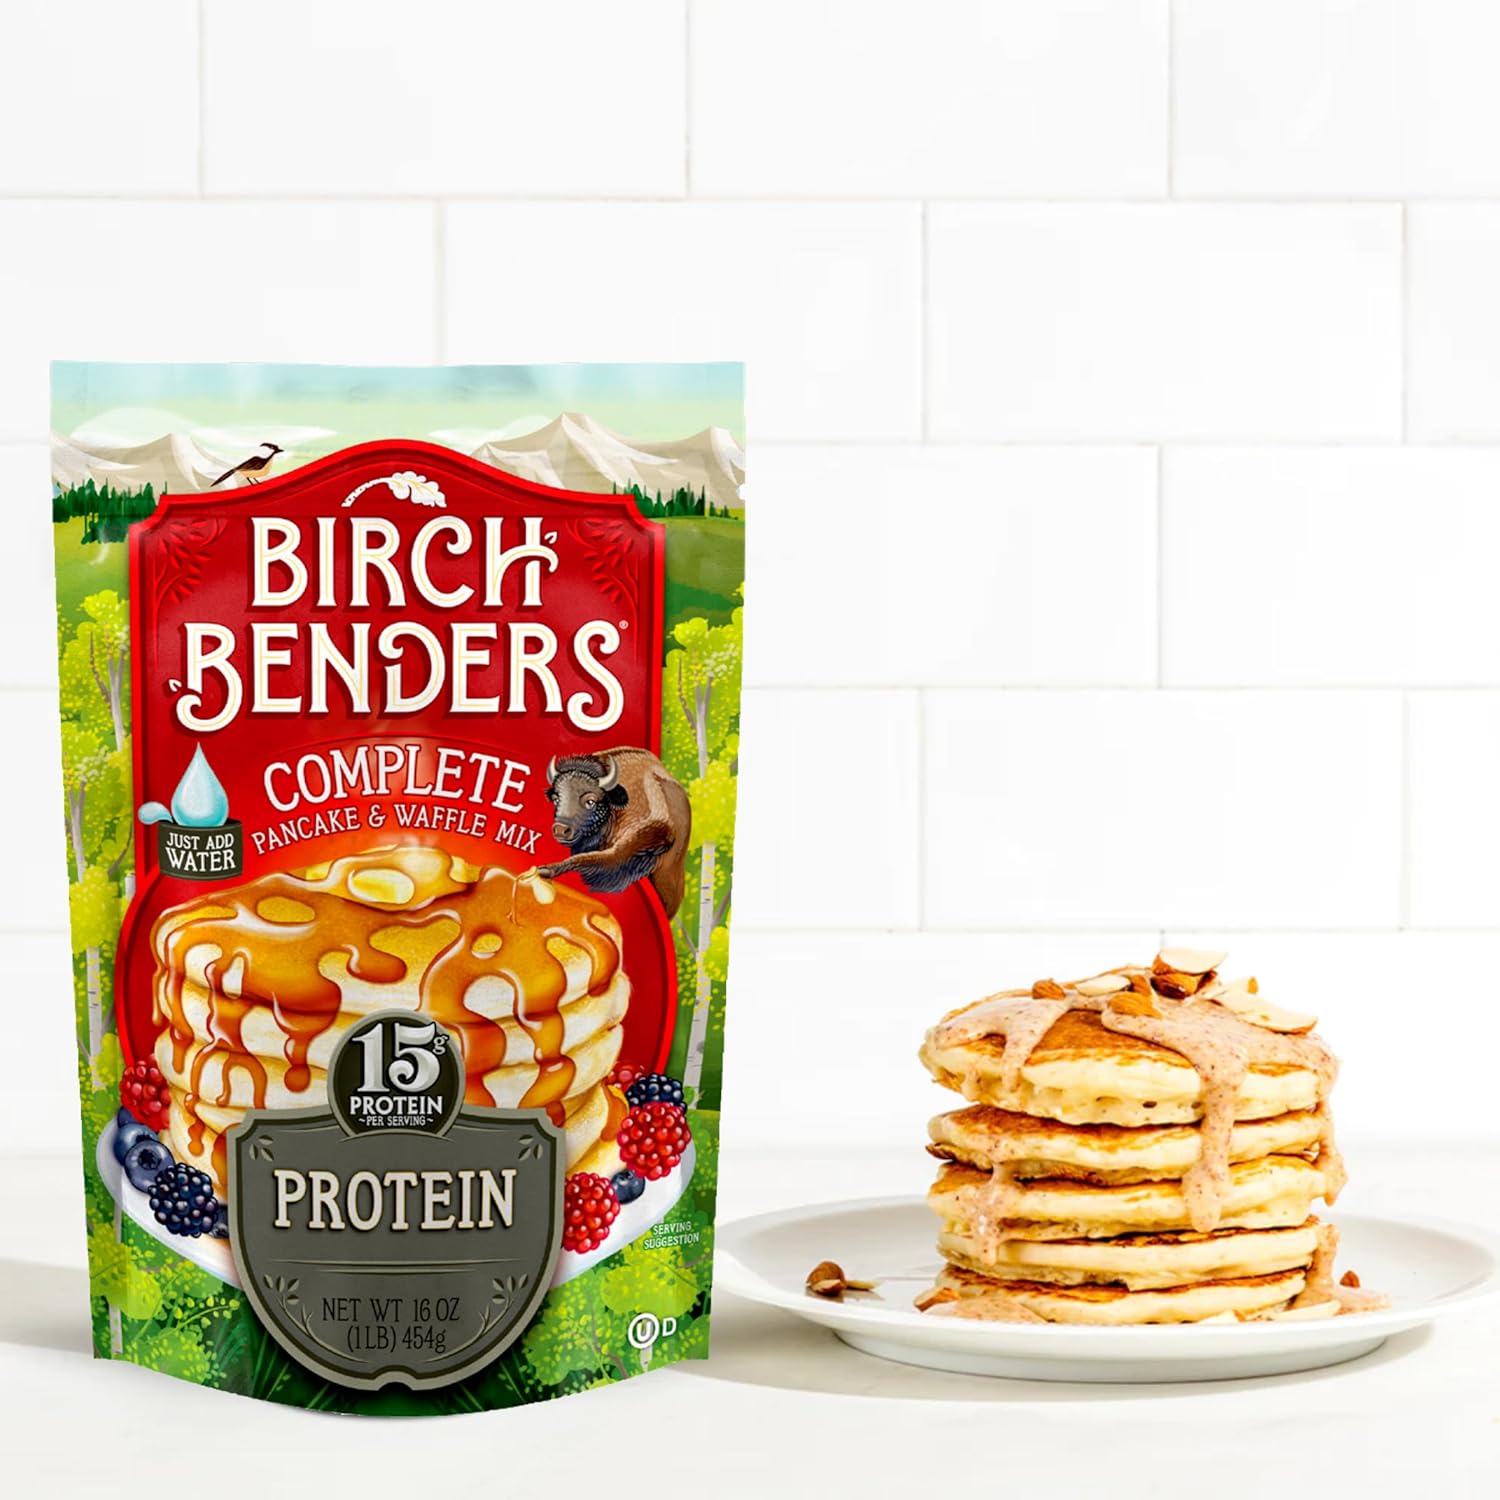 Birch Benders Protein Pancake and Waffle Mix, 16 oz (Pack of 2) with By The Cup Swivel Spoons : Grocery & Gourmet Food